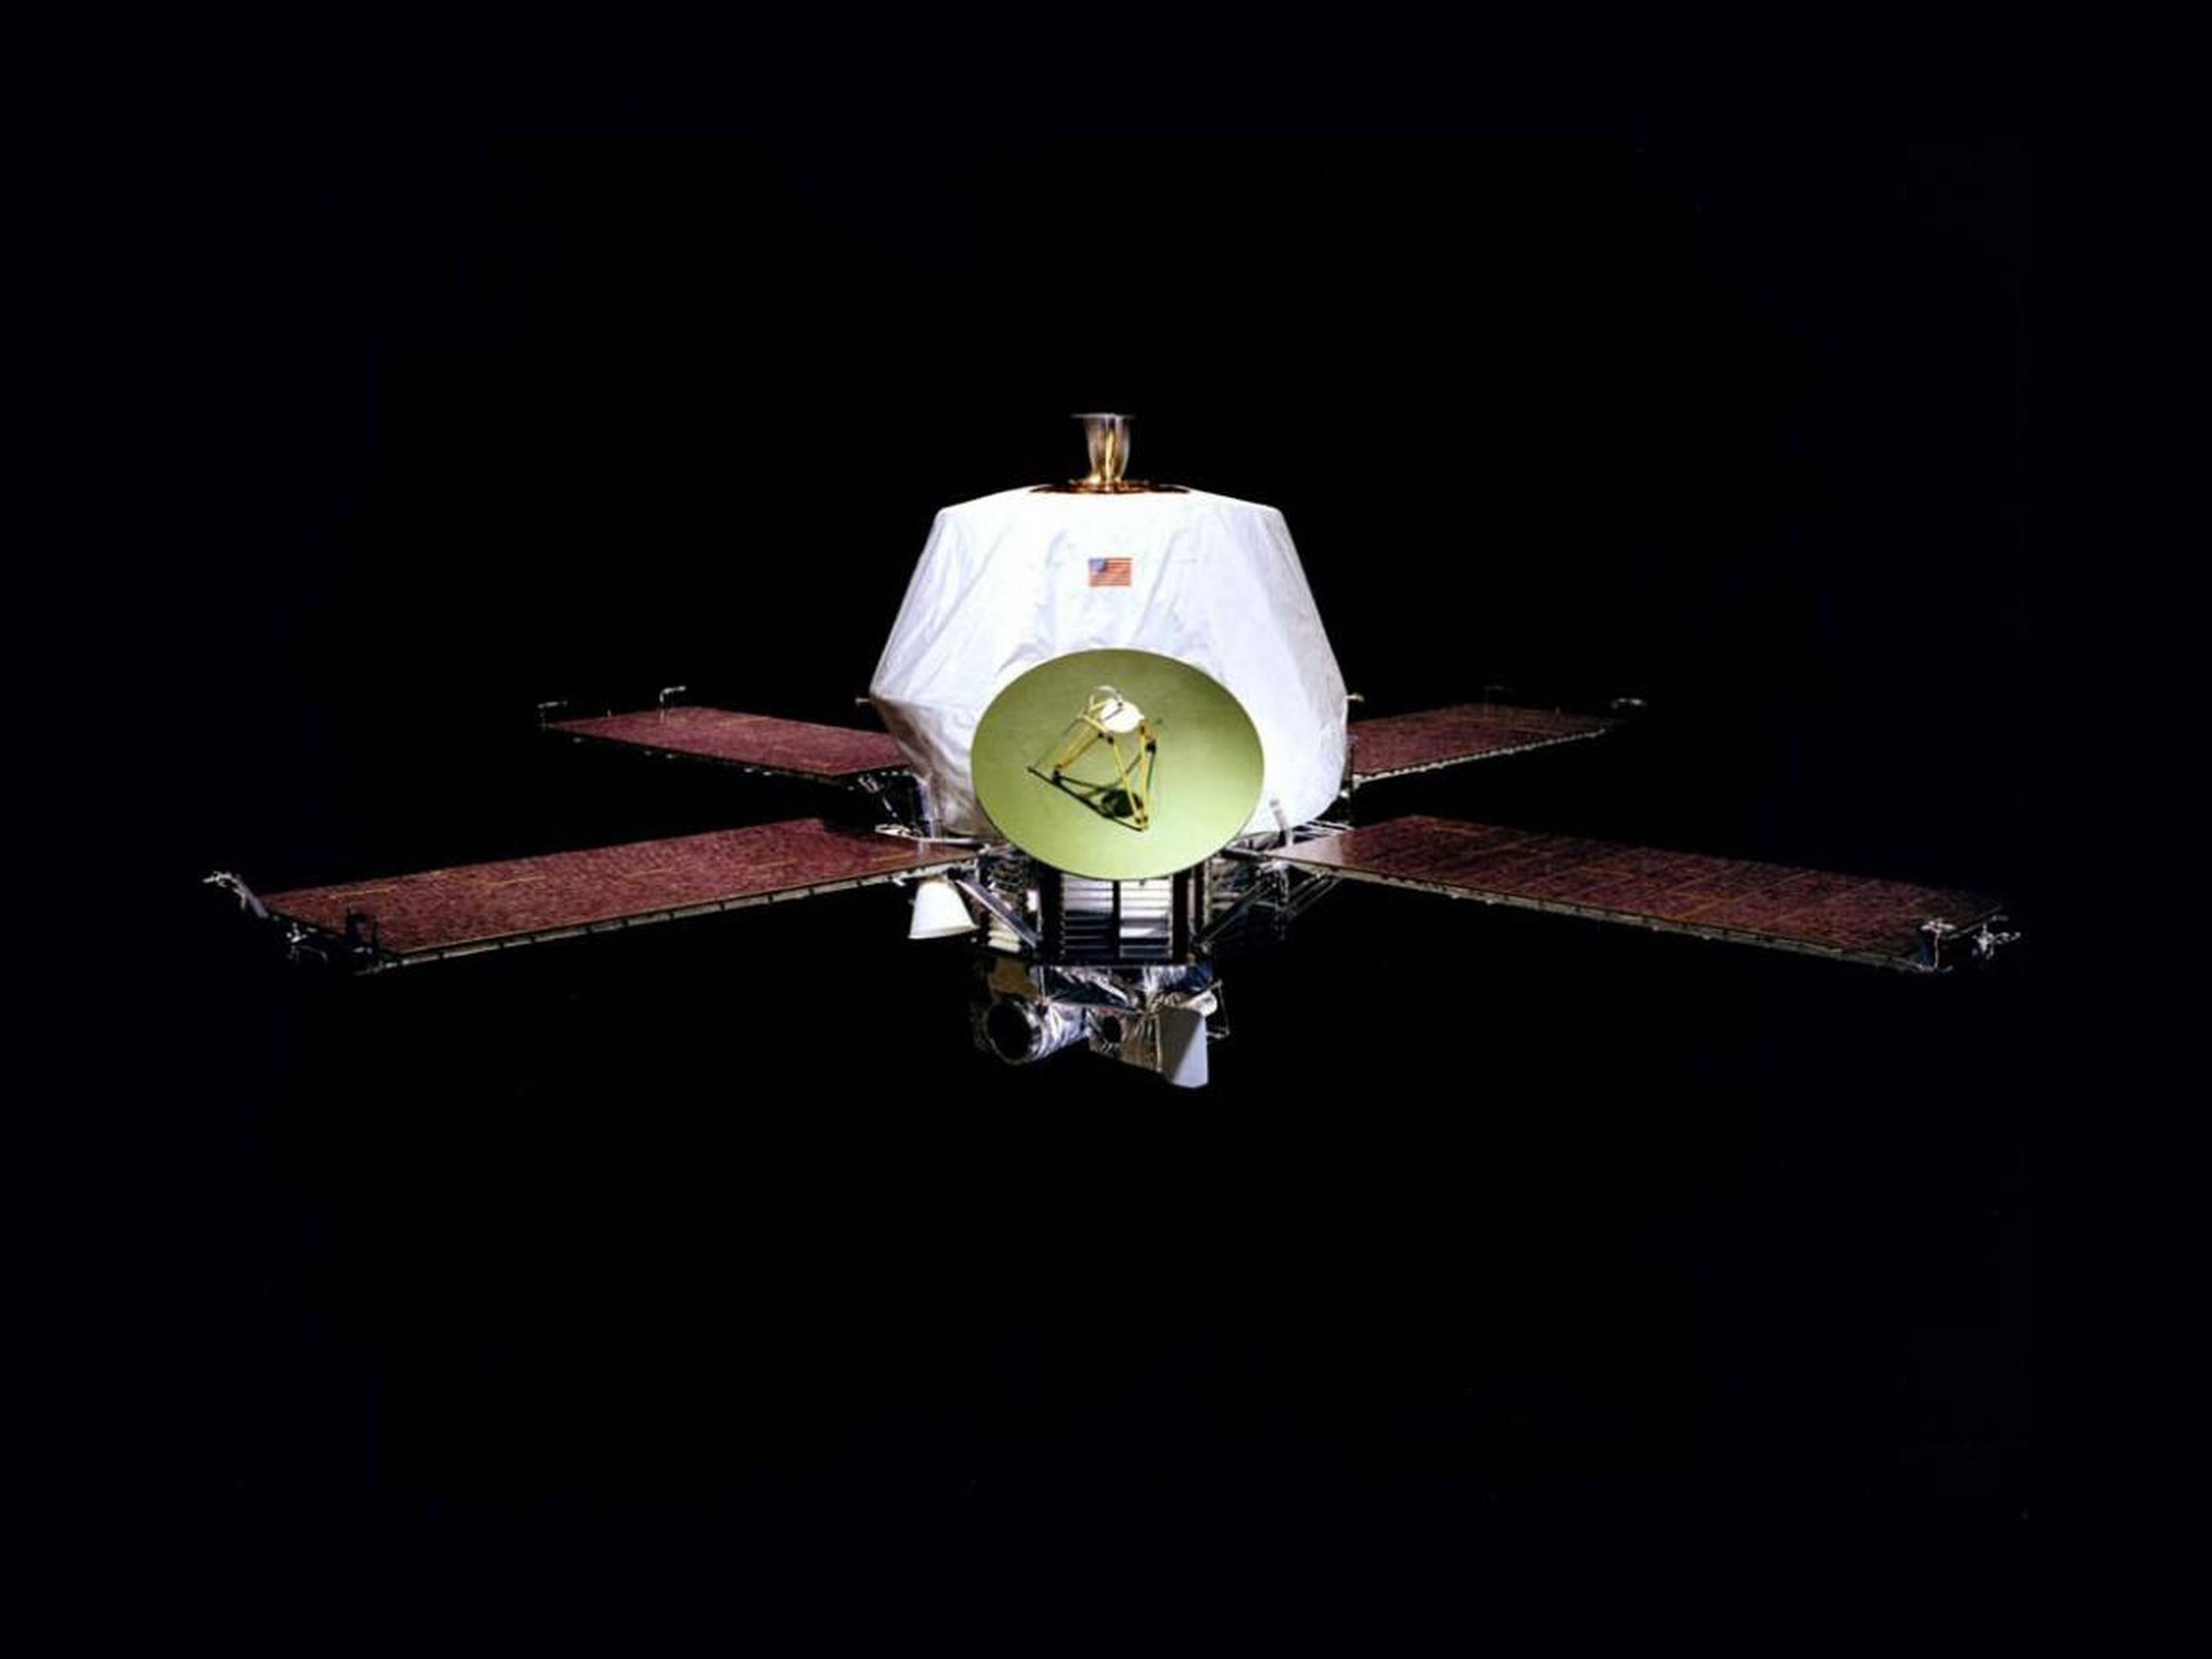 The unmanned Mariner spacecraft became the first to orbit another planet (Mars) in 1971.